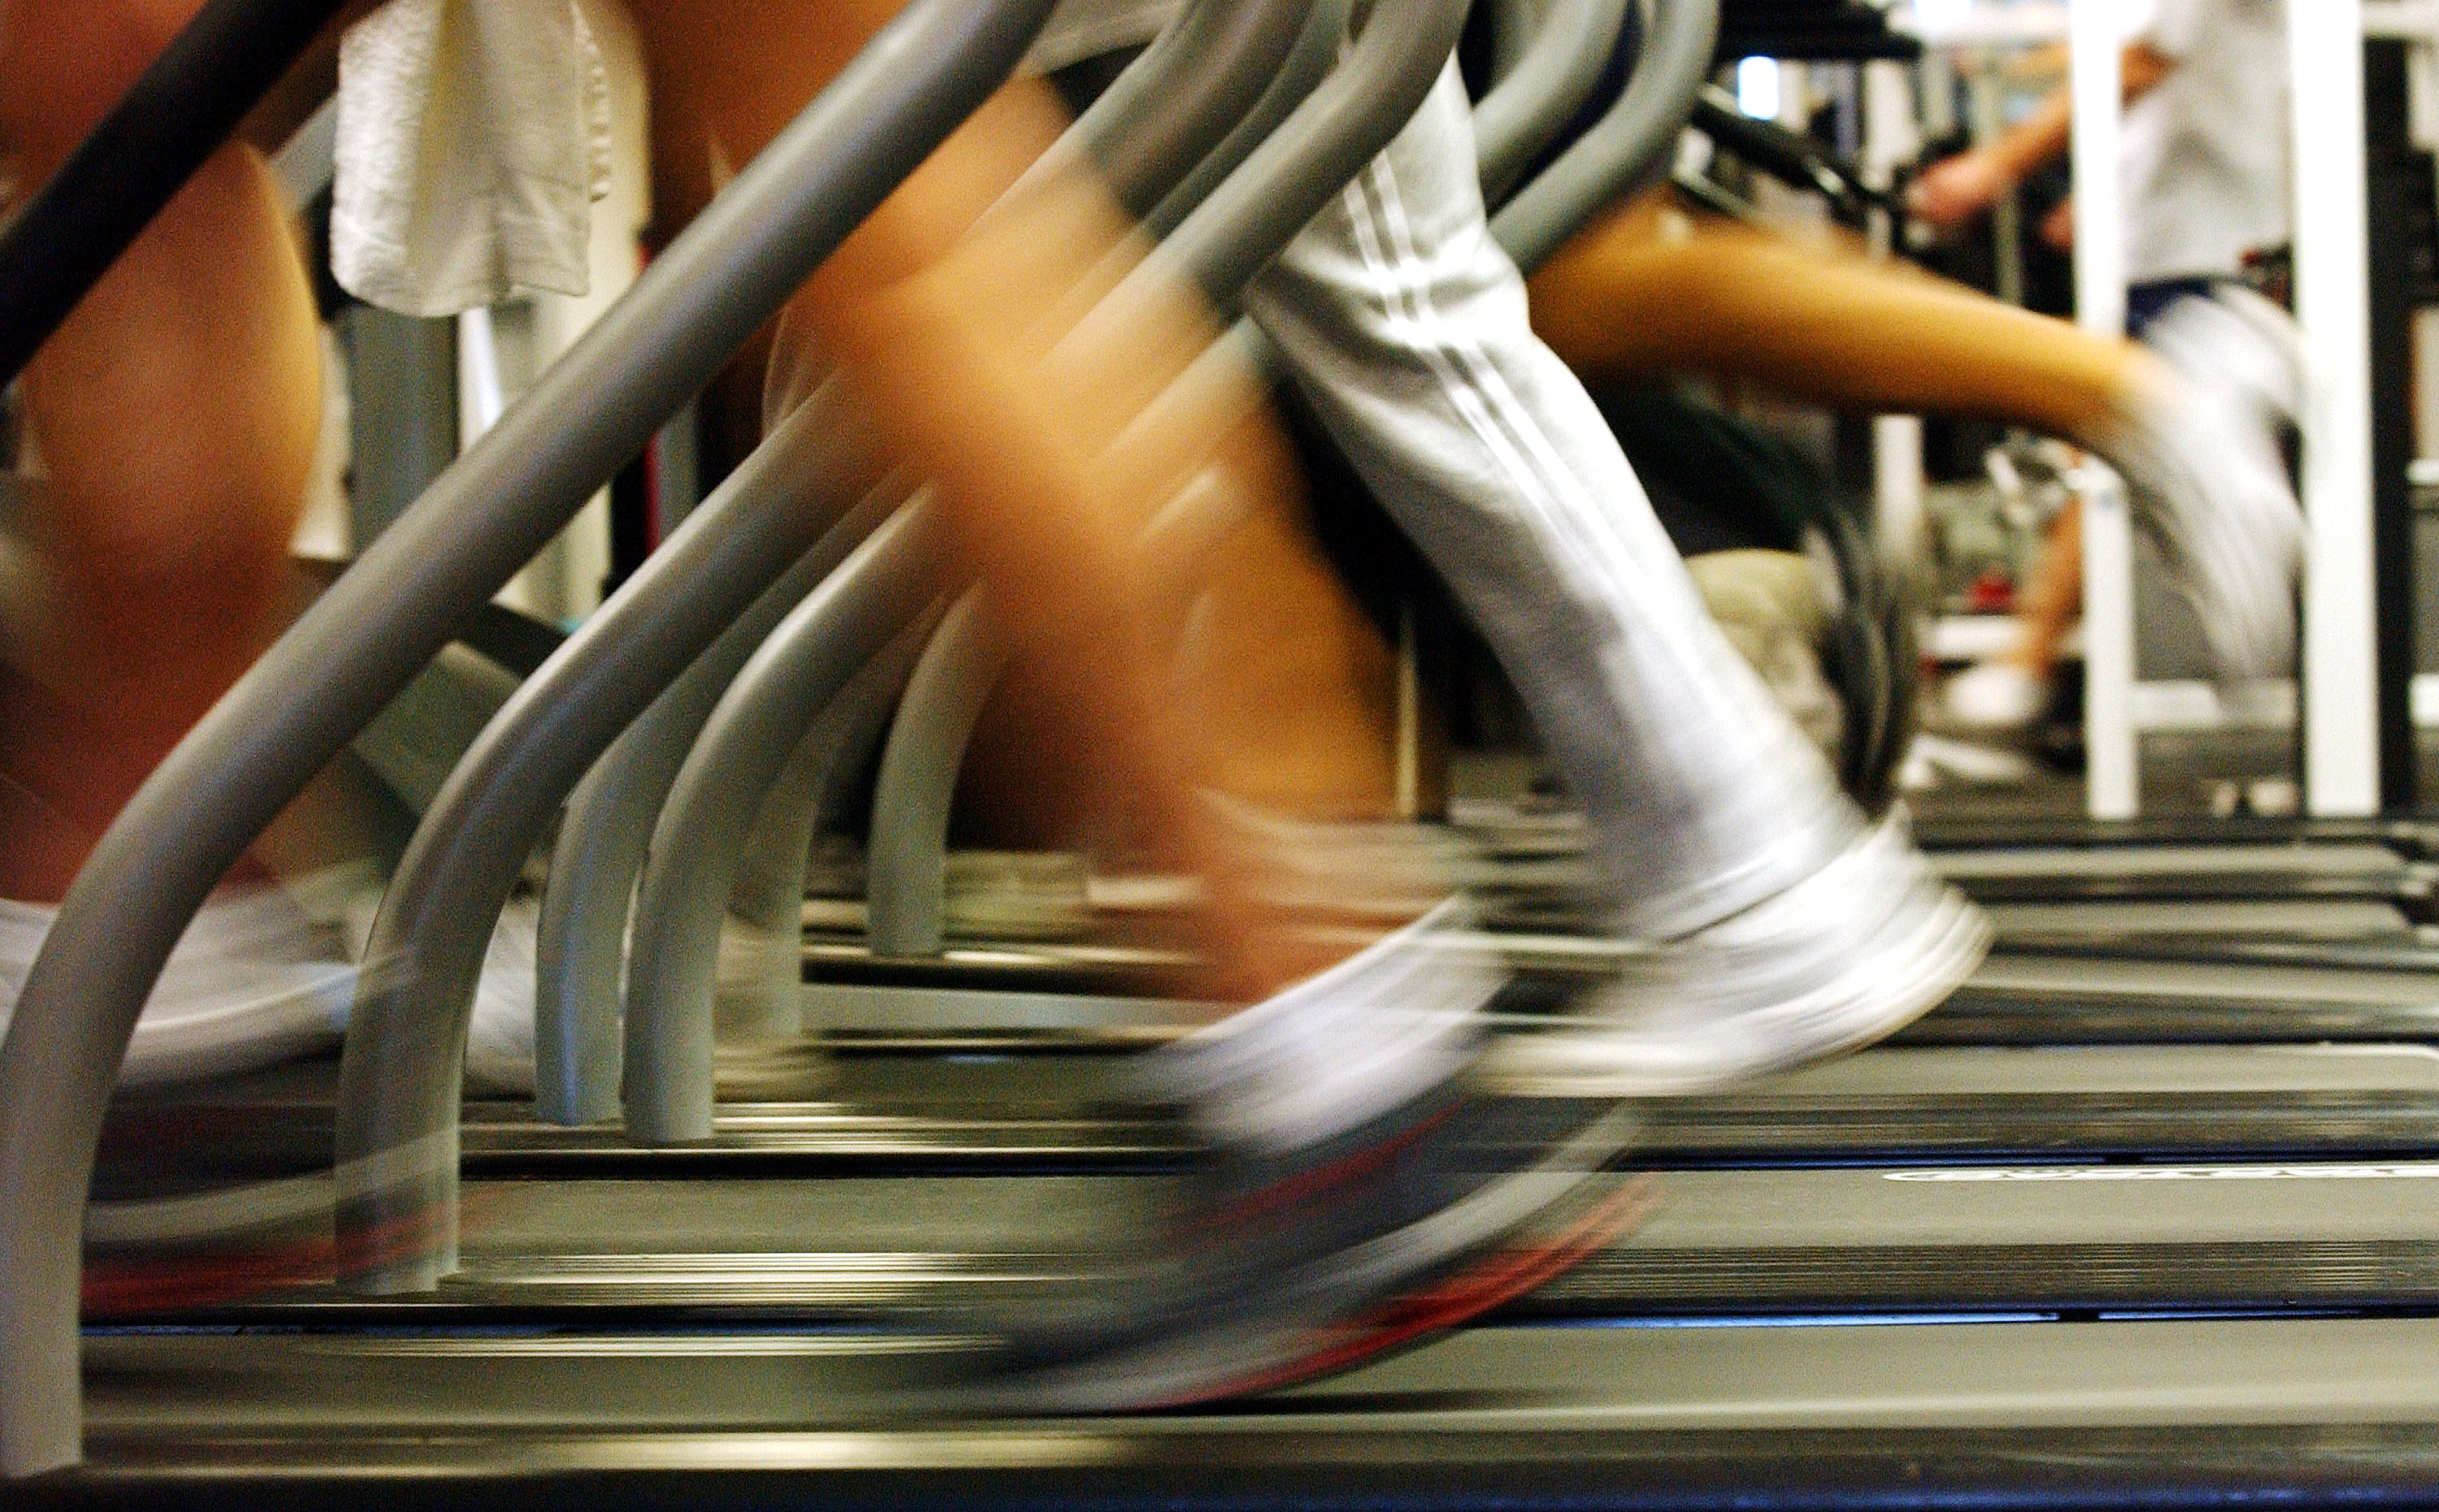 DC area is first in fitness for the third straight year